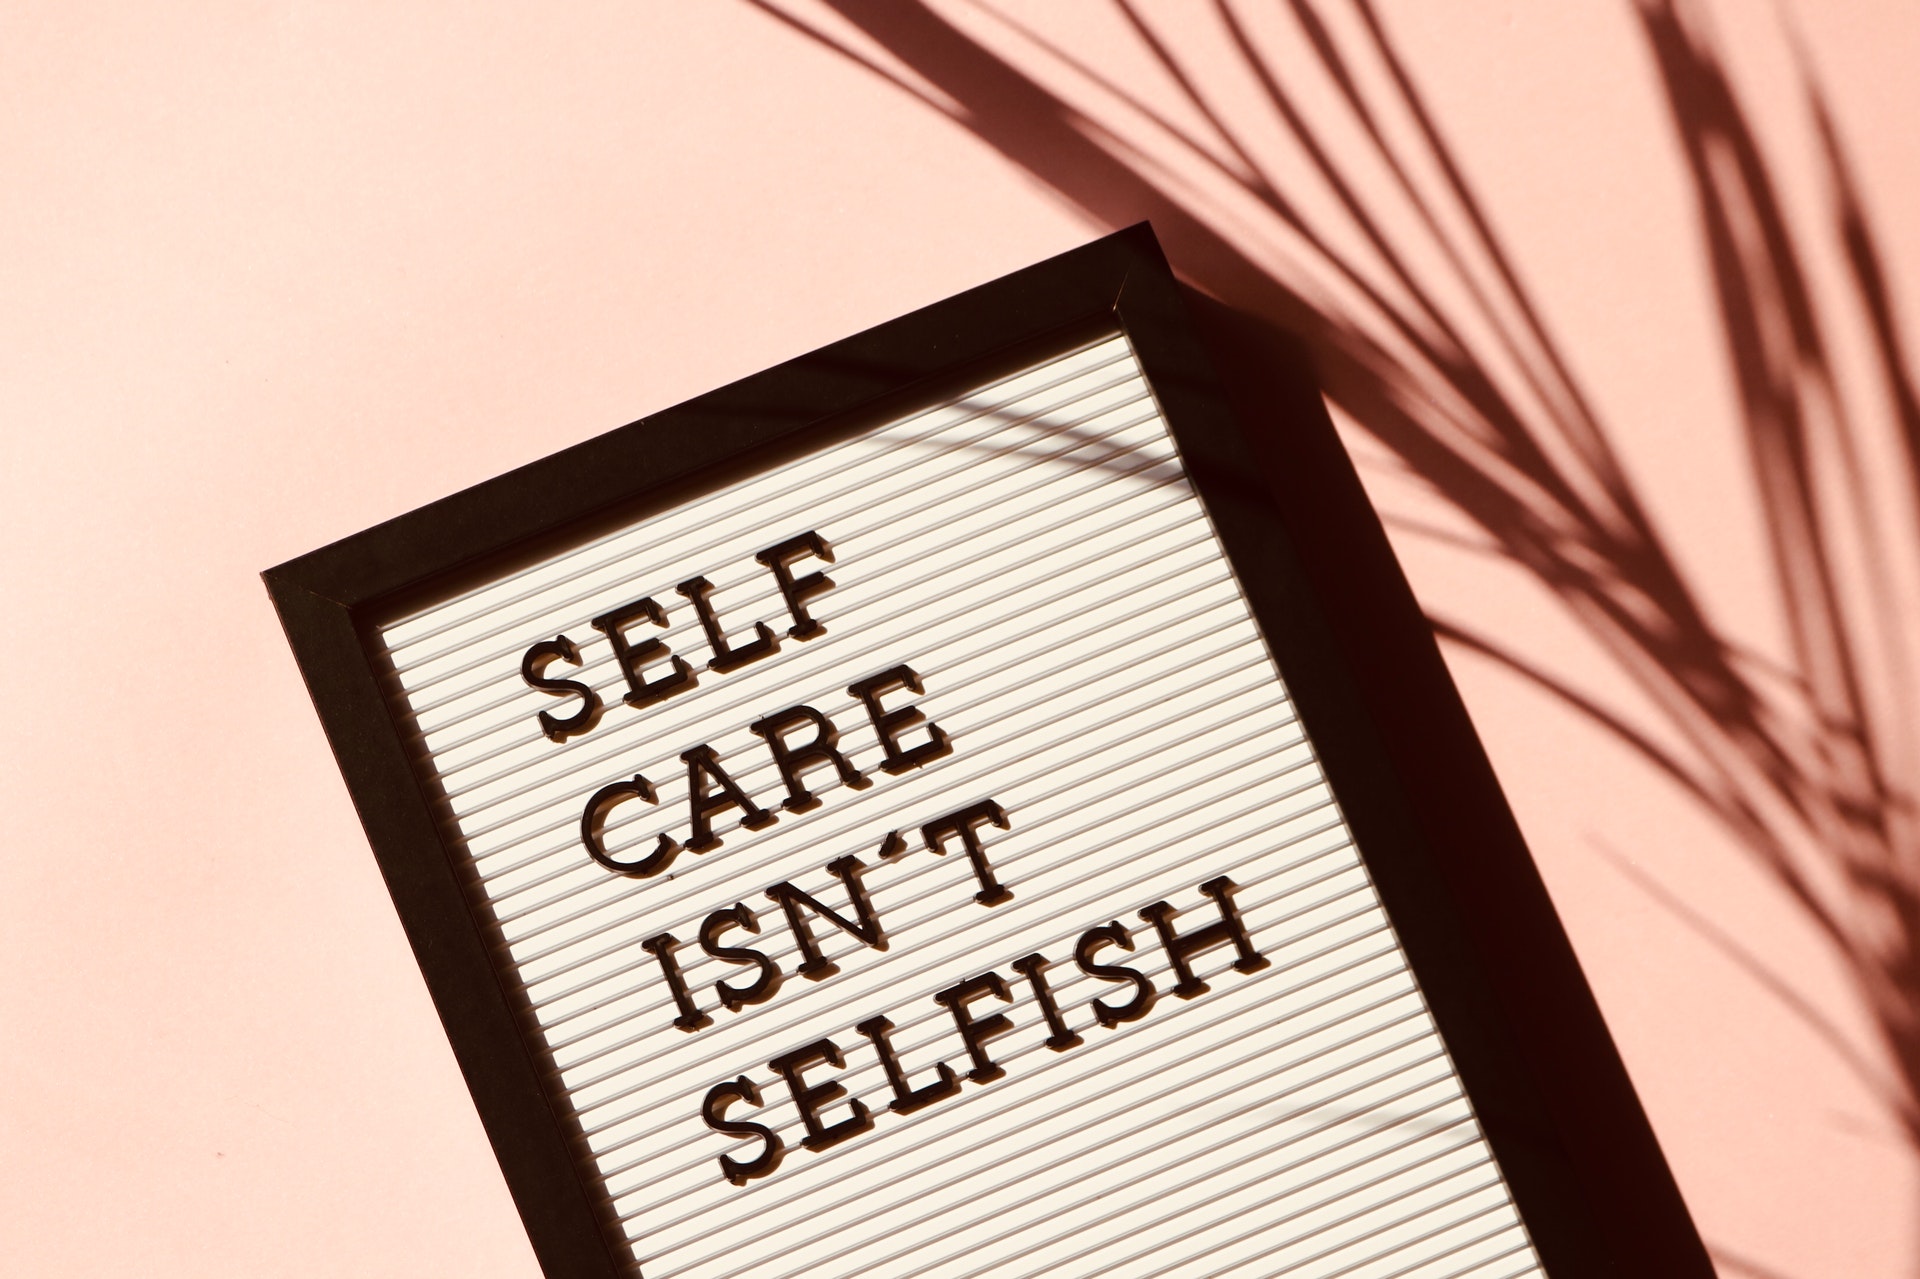 The importance of taking care of yourself